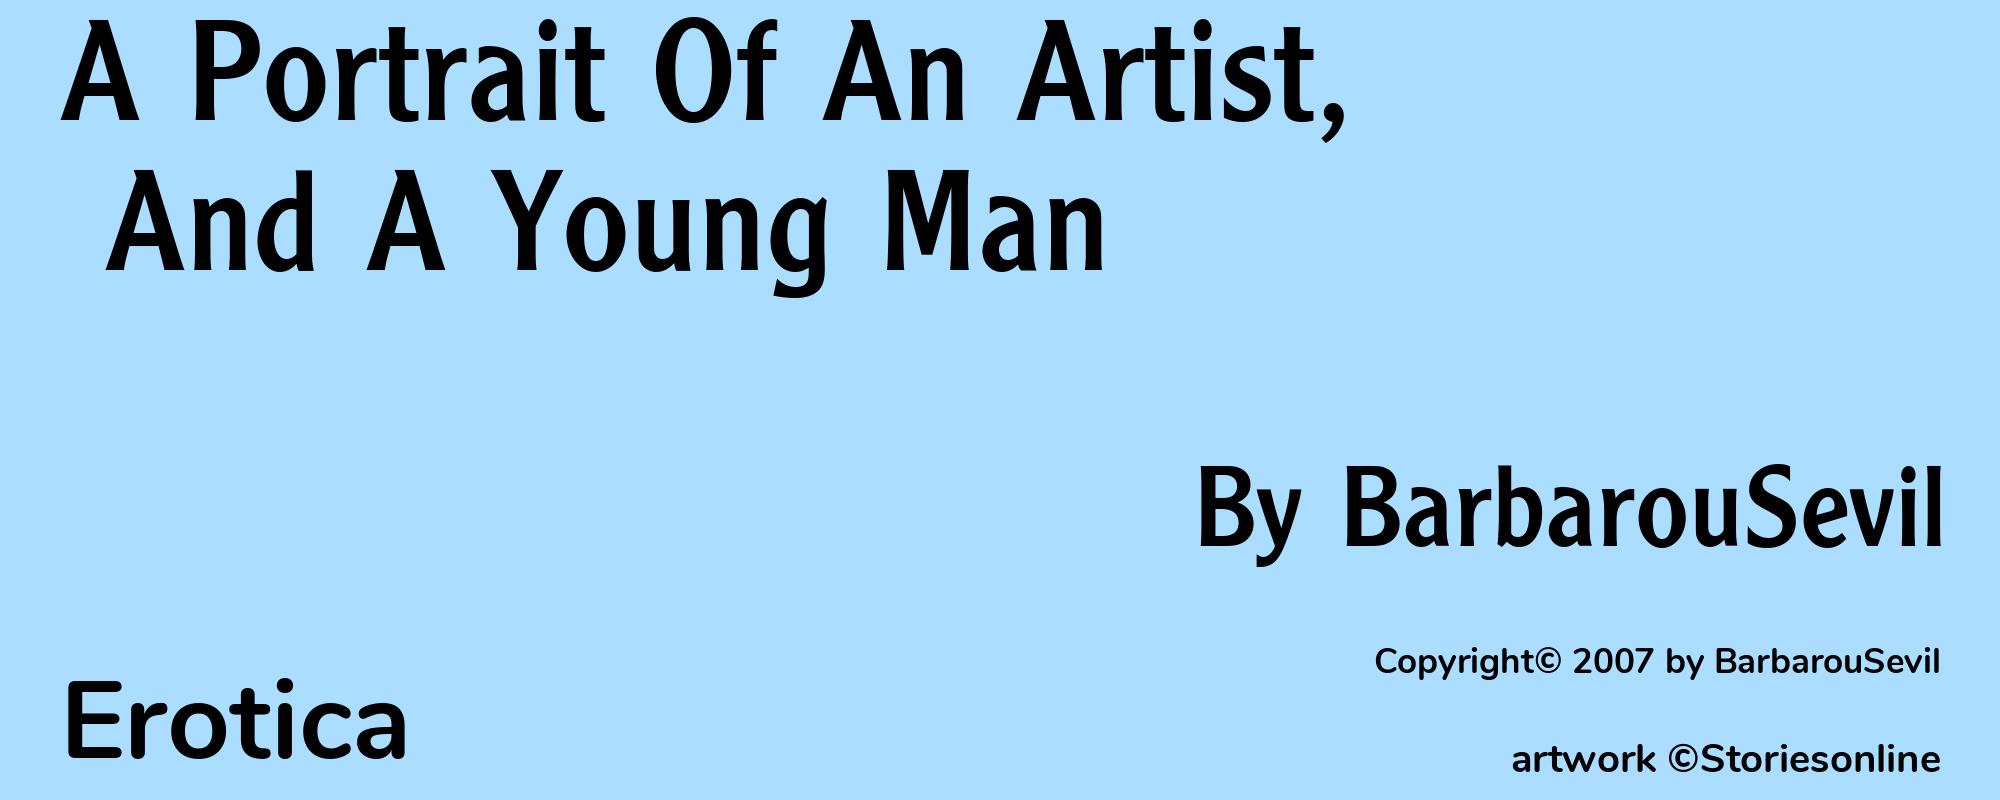 A Portrait Of An Artist, And A Young Man - Cover